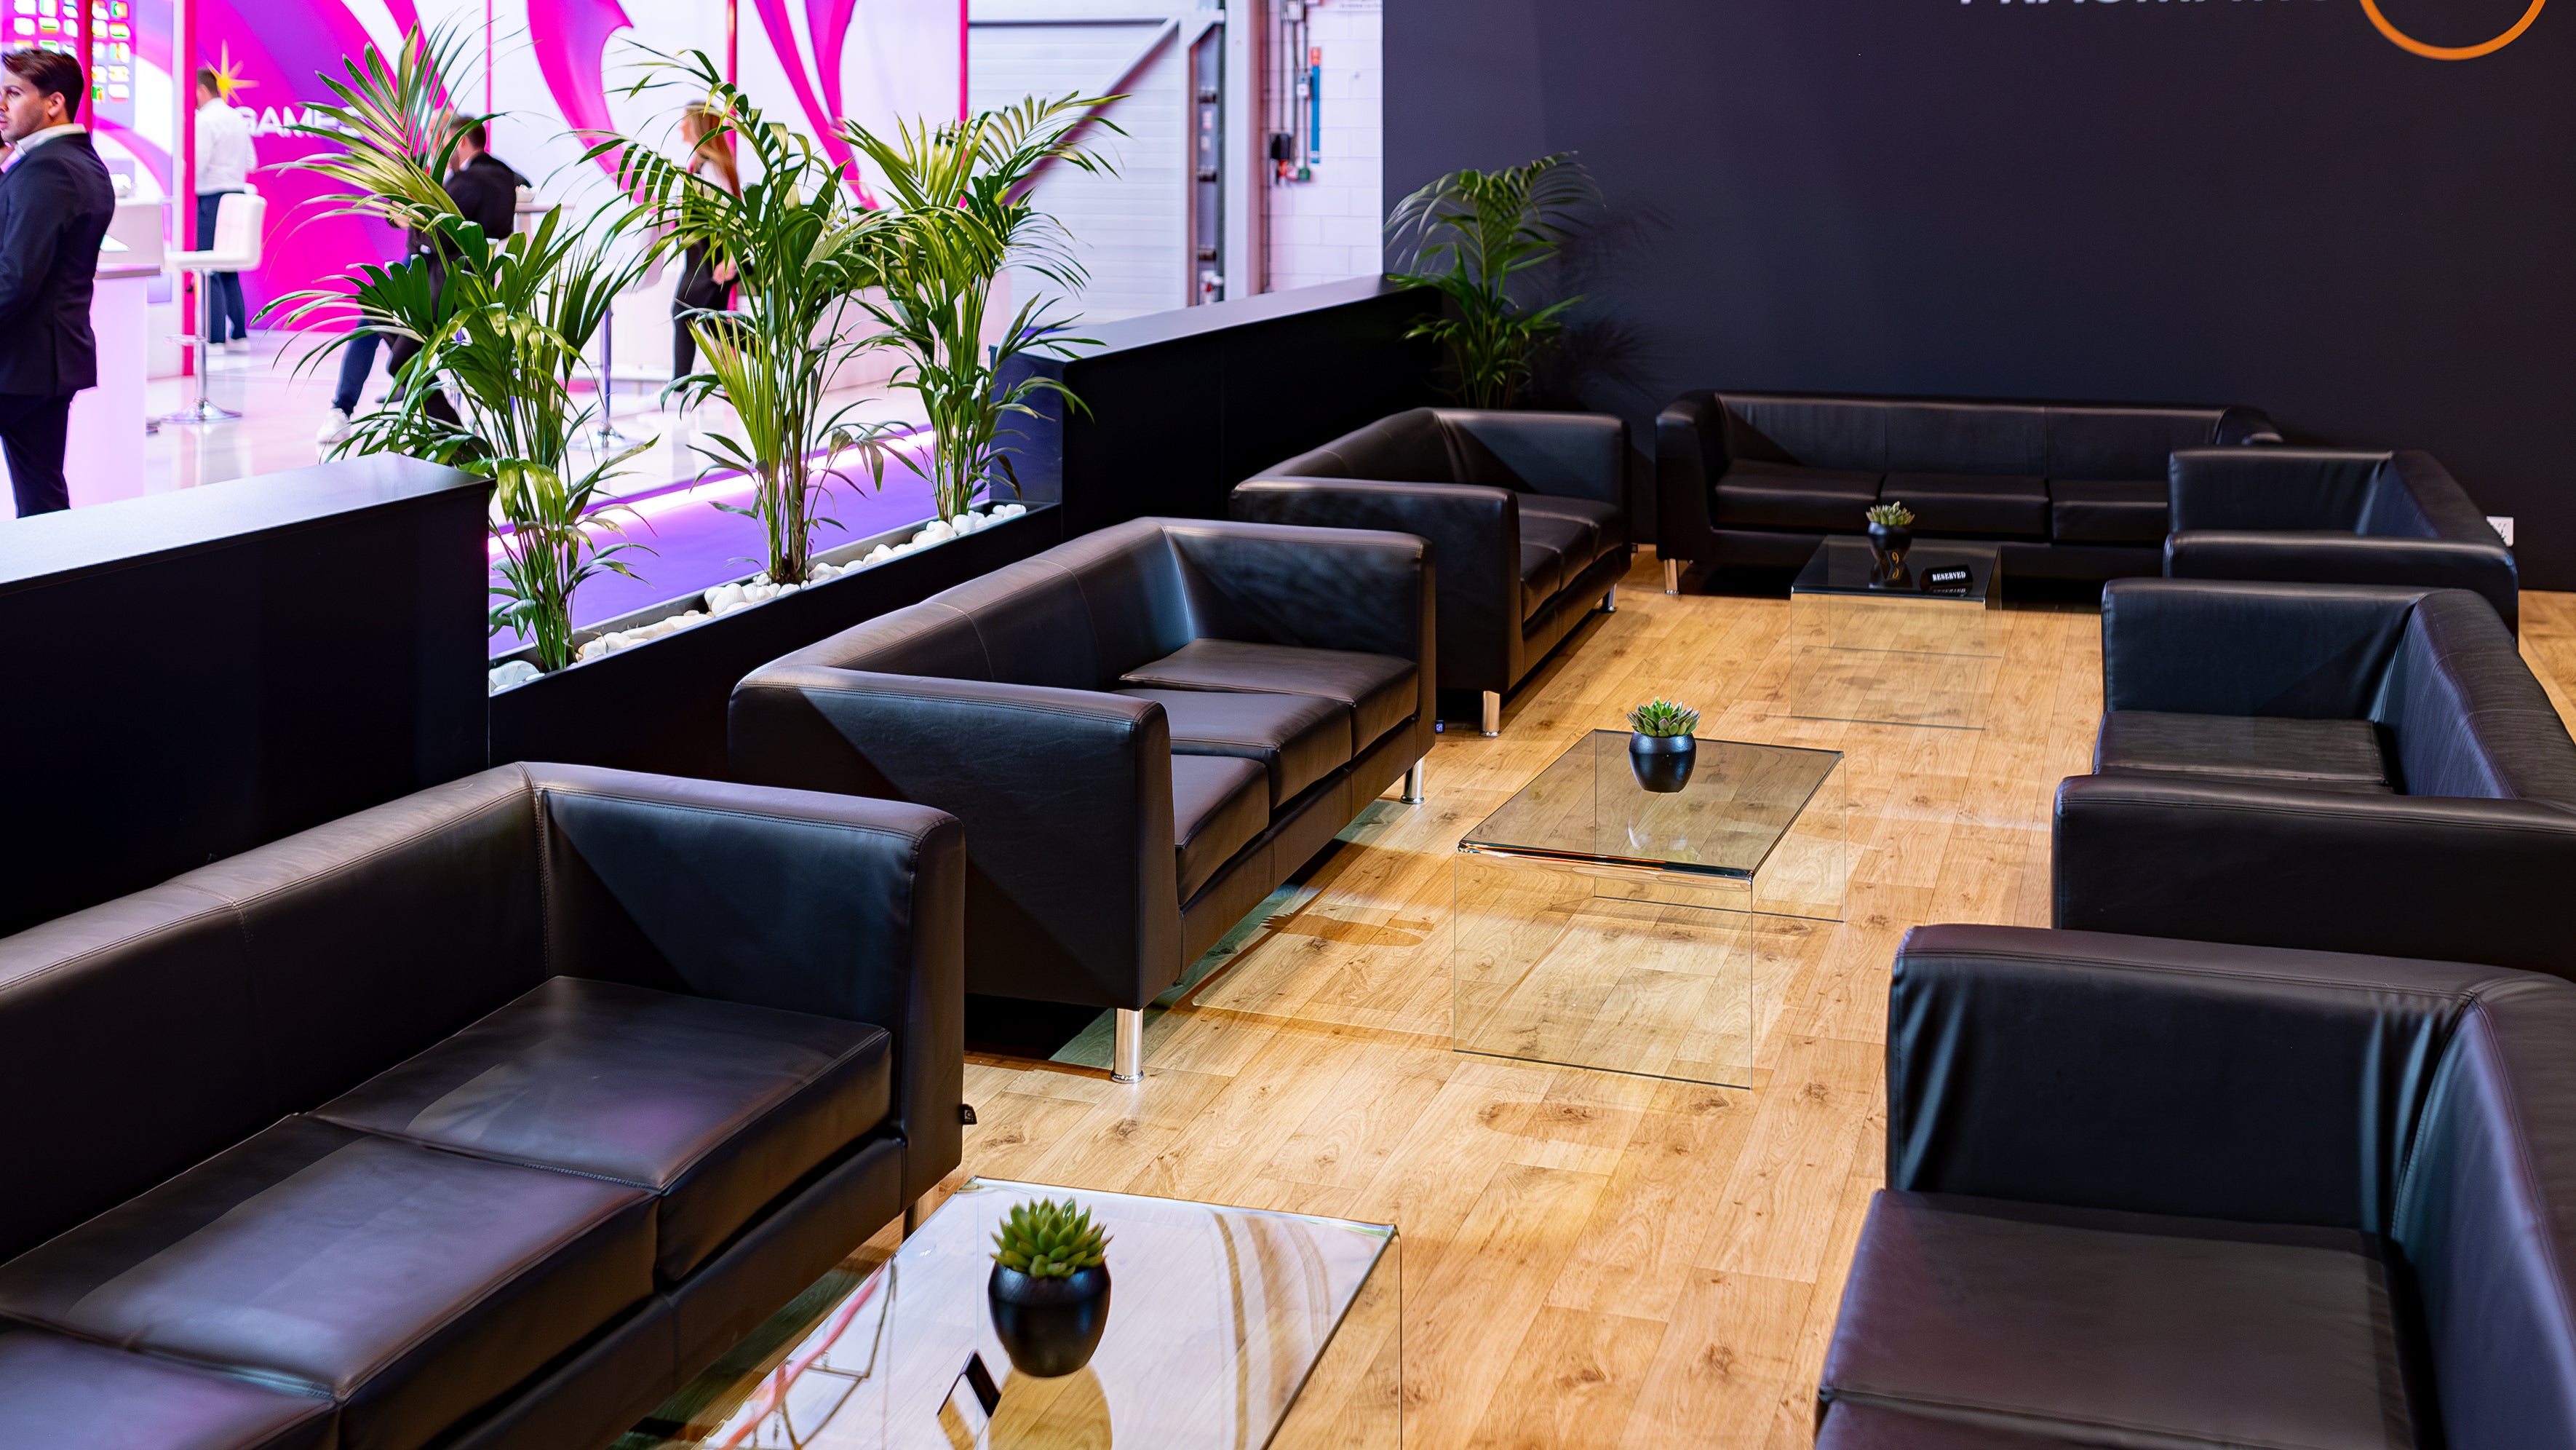 A contemporary lounge setup at ICE London Exhibition was designed by event florist Amaranté London, featuring sleek black leather sofas and glass tables, complemented by green potted plants, creating a stylish and welcoming discussion area.